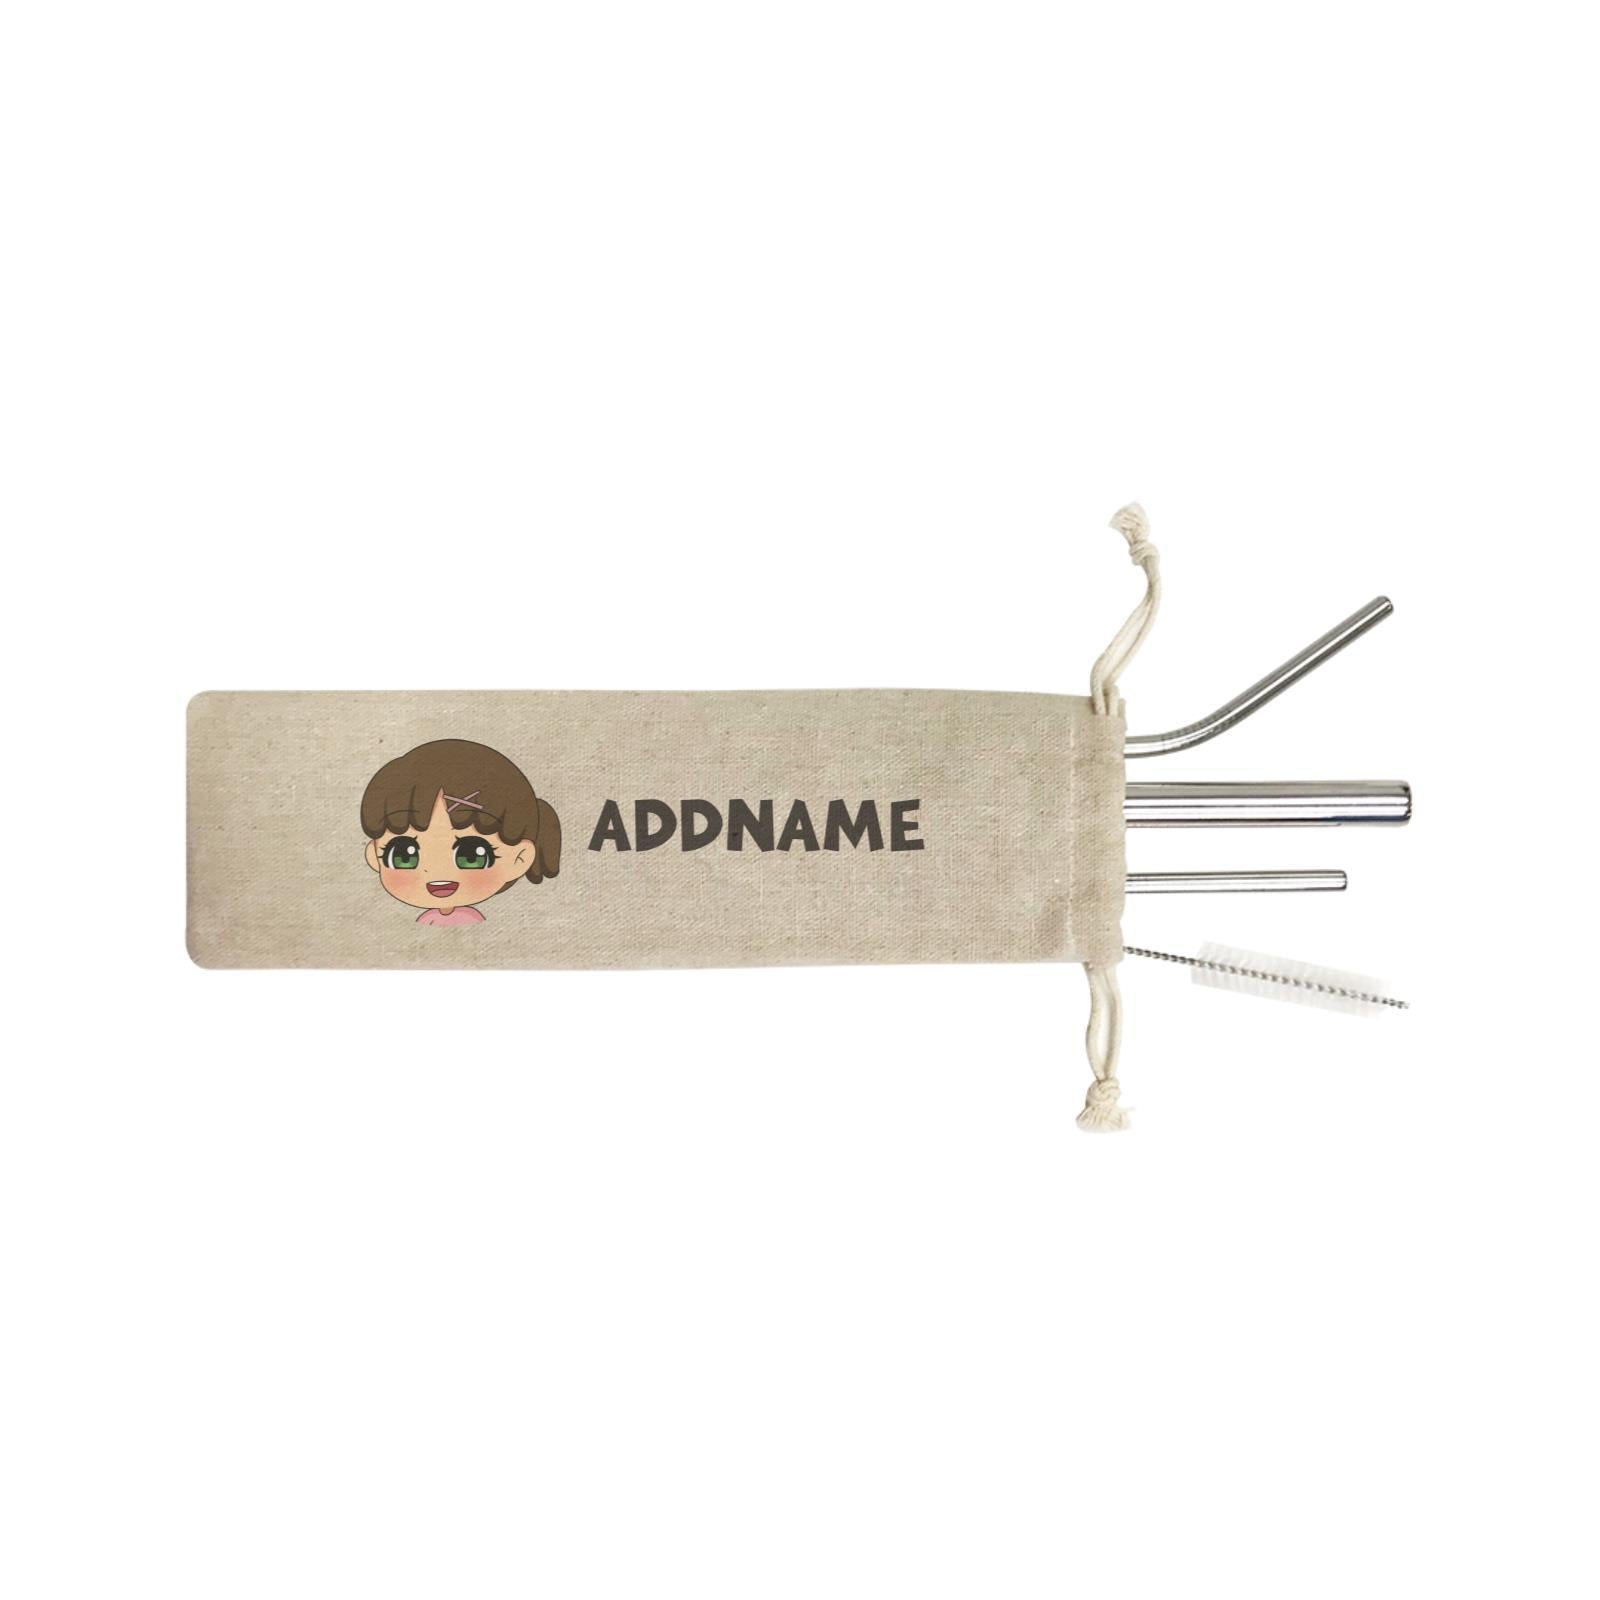 Children's Day Gift Series Little Girl Facing Right Addname SB 4-in-1 Stainless Steel Straw Set In a Satchel